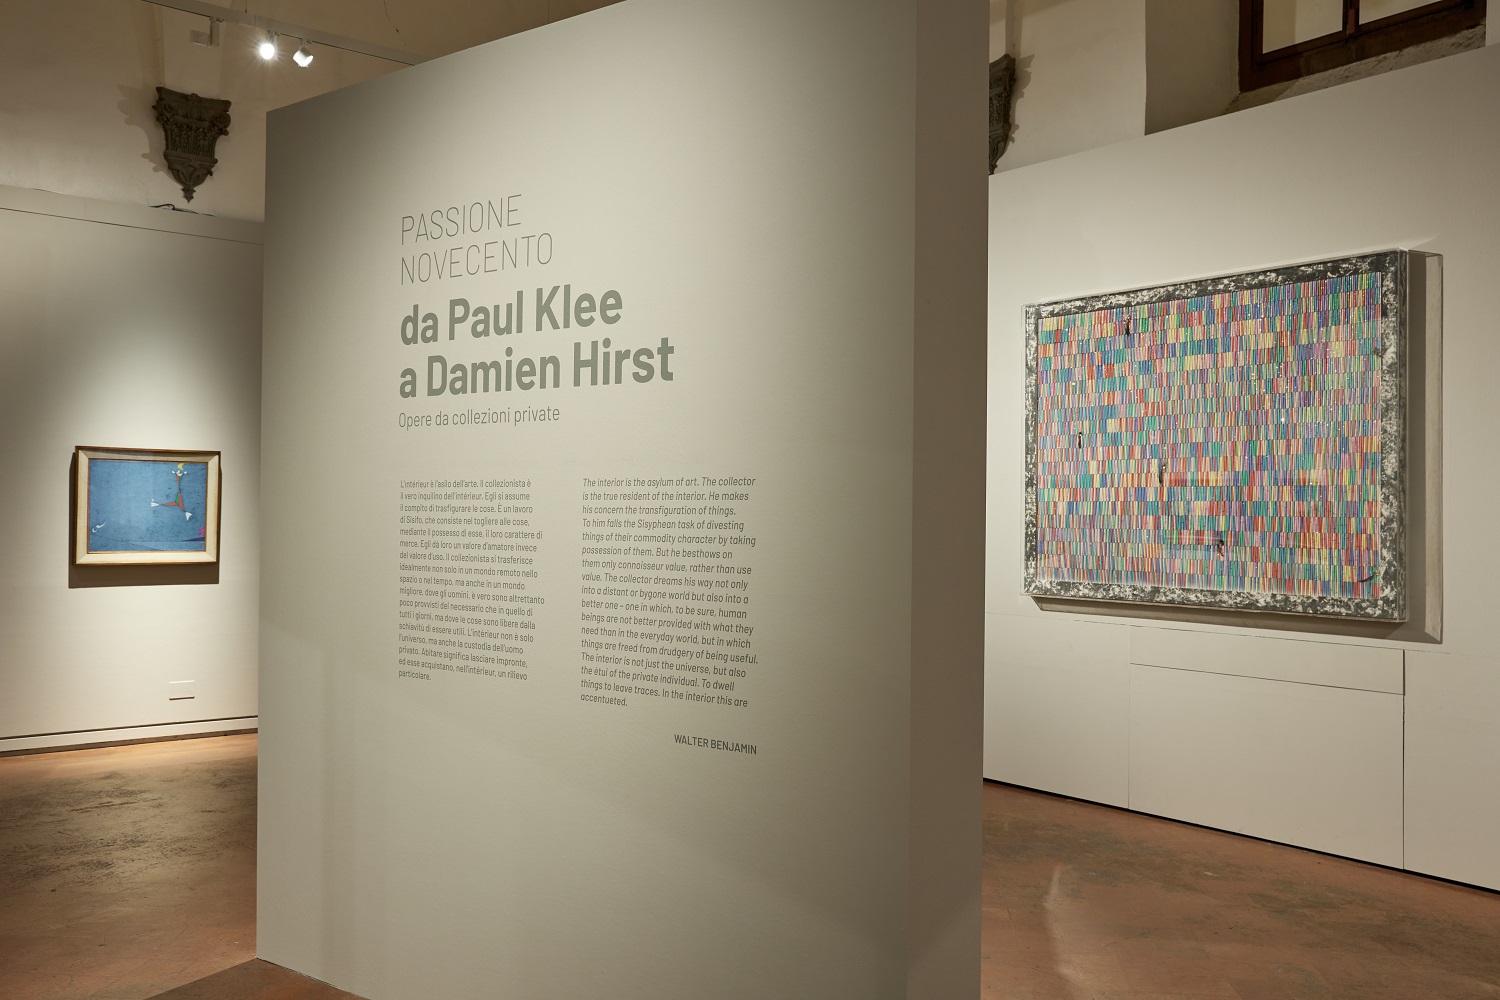 Passione Novecento from Paul Klee to Damien Hirst. Works from private collections